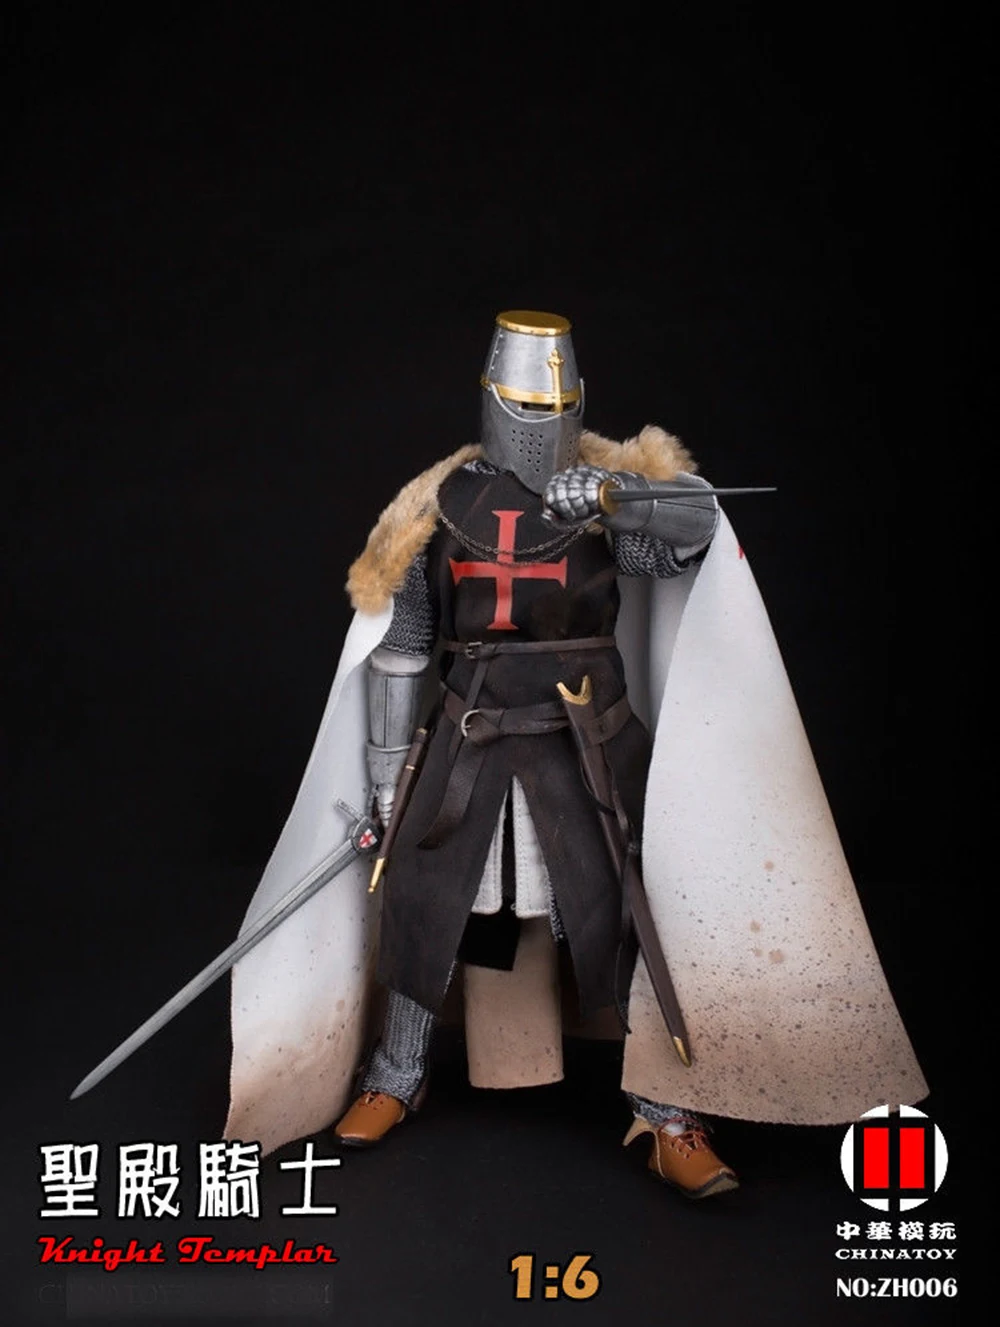 China Toy 1/6 ZH006 Medieval Templar Knight Soldier Figure Model 